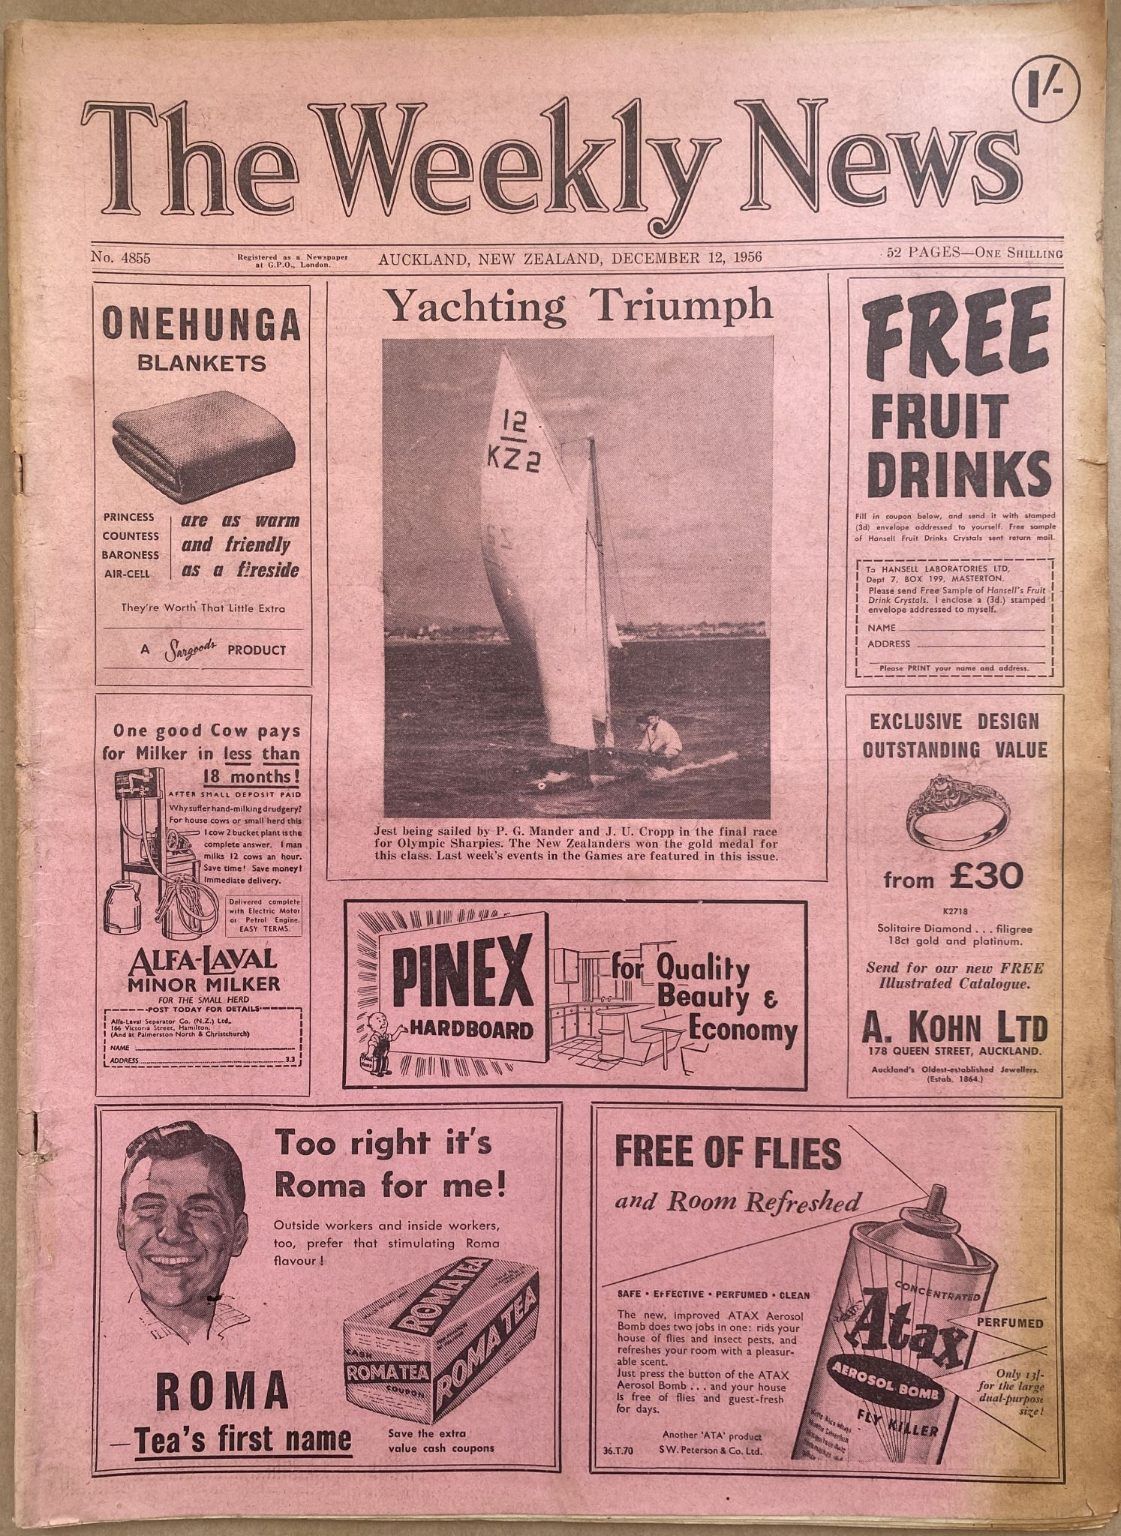 OLD NEWSPAPER: The Weekly News - No. 4855, 12 December 1956